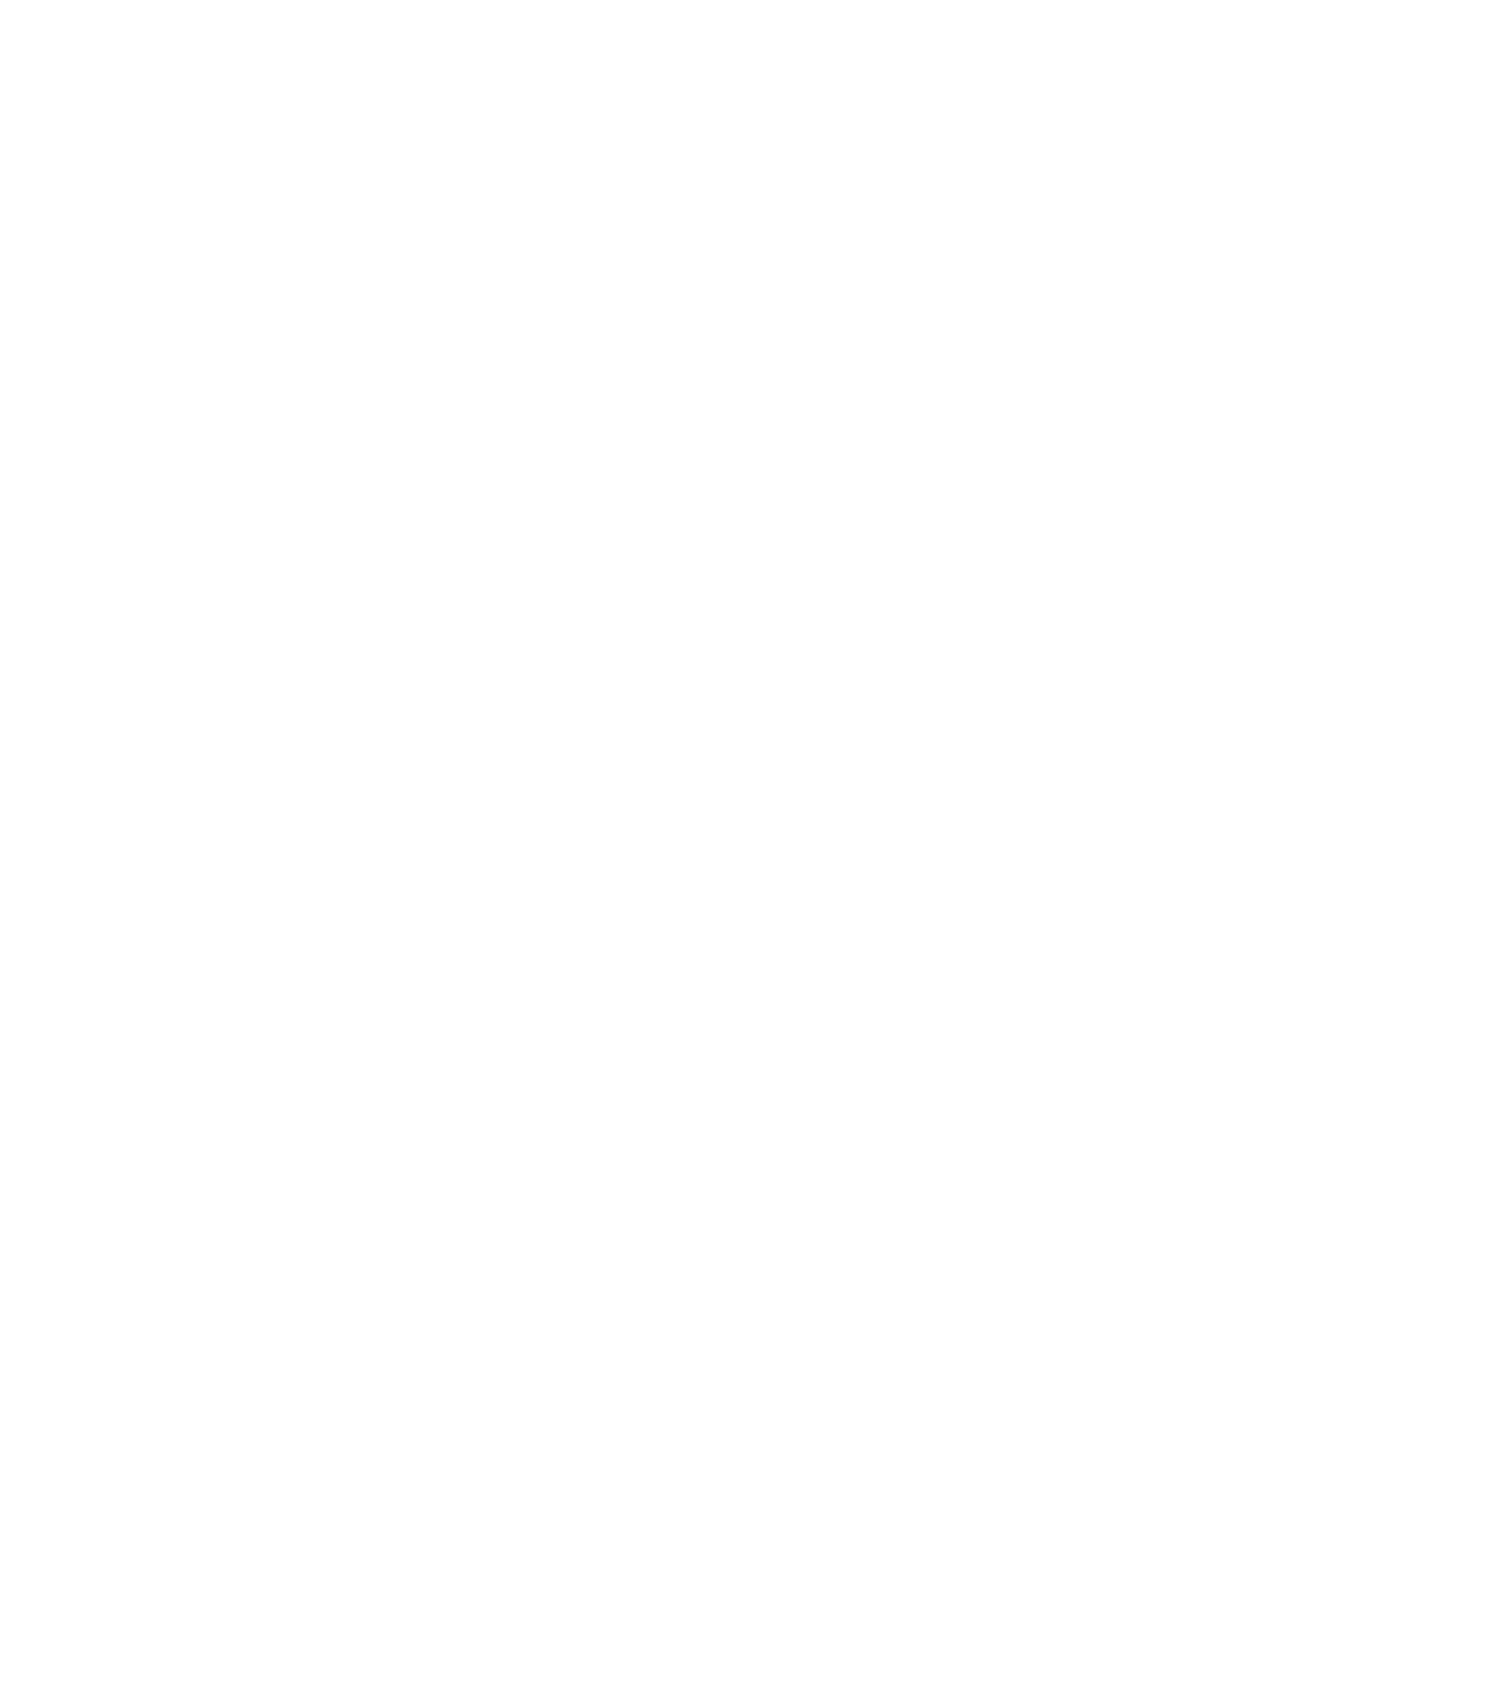 Lakeshore Therapy